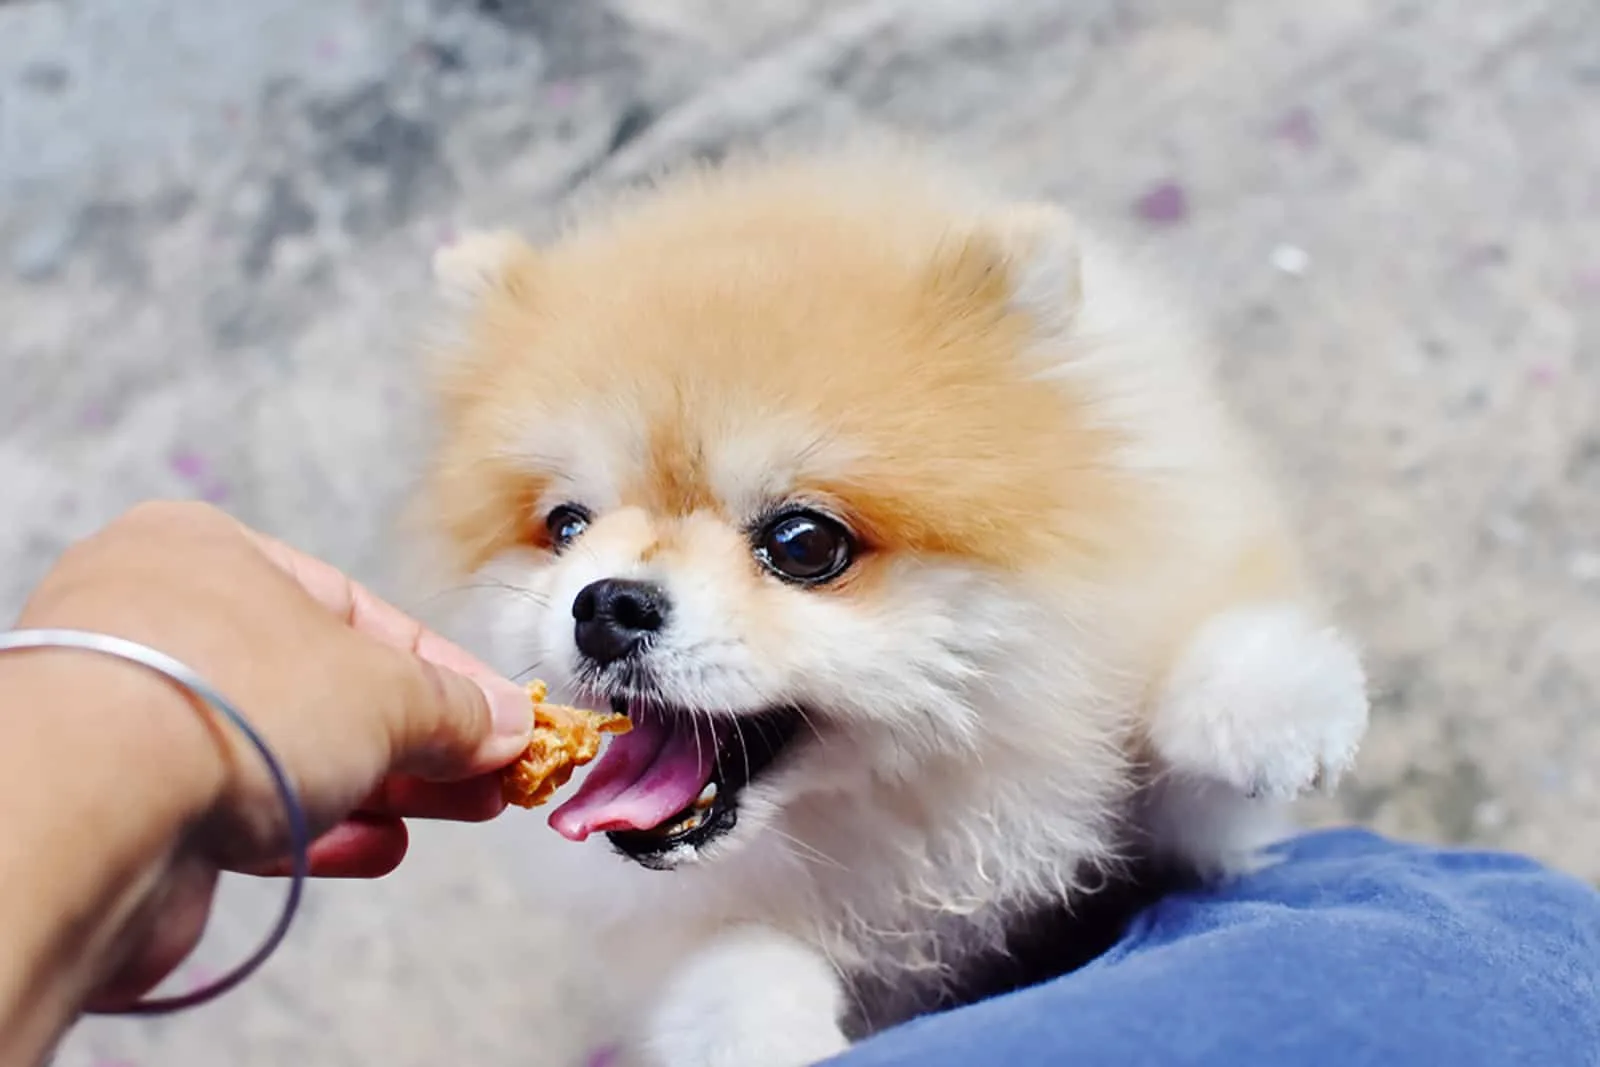 pomeranian dog eating food from human's hand outdoors